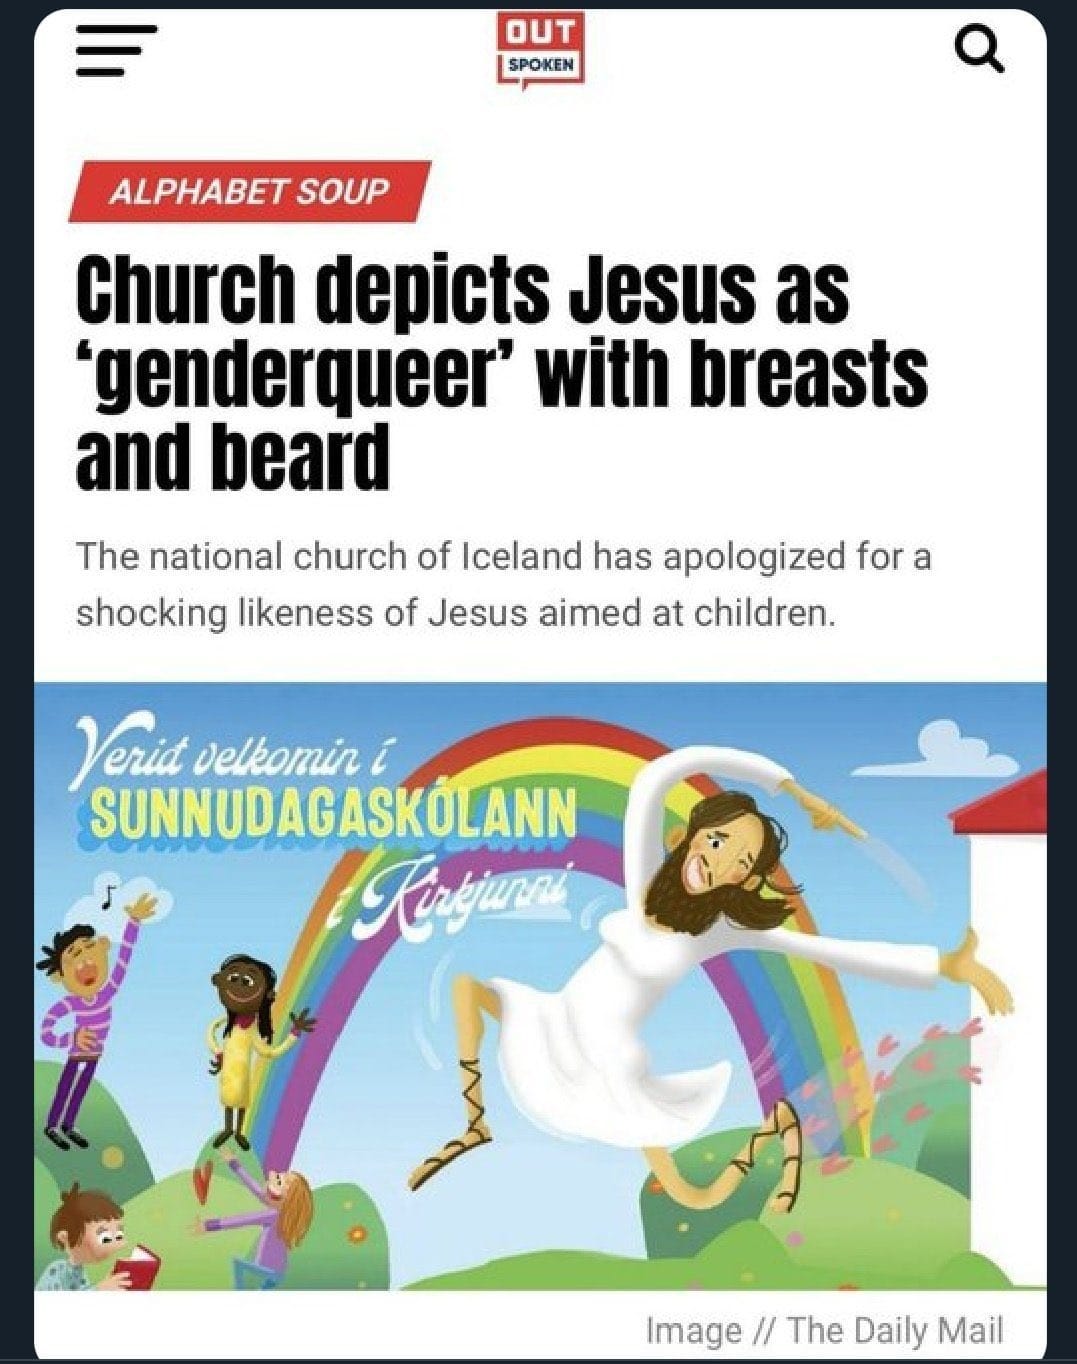 May be a cartoon of one or more people and text that says 'OUT SPOKEN ALPHABET SOUP Church depicts Jesus as 'genderqueer' with breasts and beard The national church of Iceland has apologized for a shocking likeness of Jesus aimed at children. Verid velkomin SUNNUDAGASKÓLANN Karljunei Image // The Daily Mail'